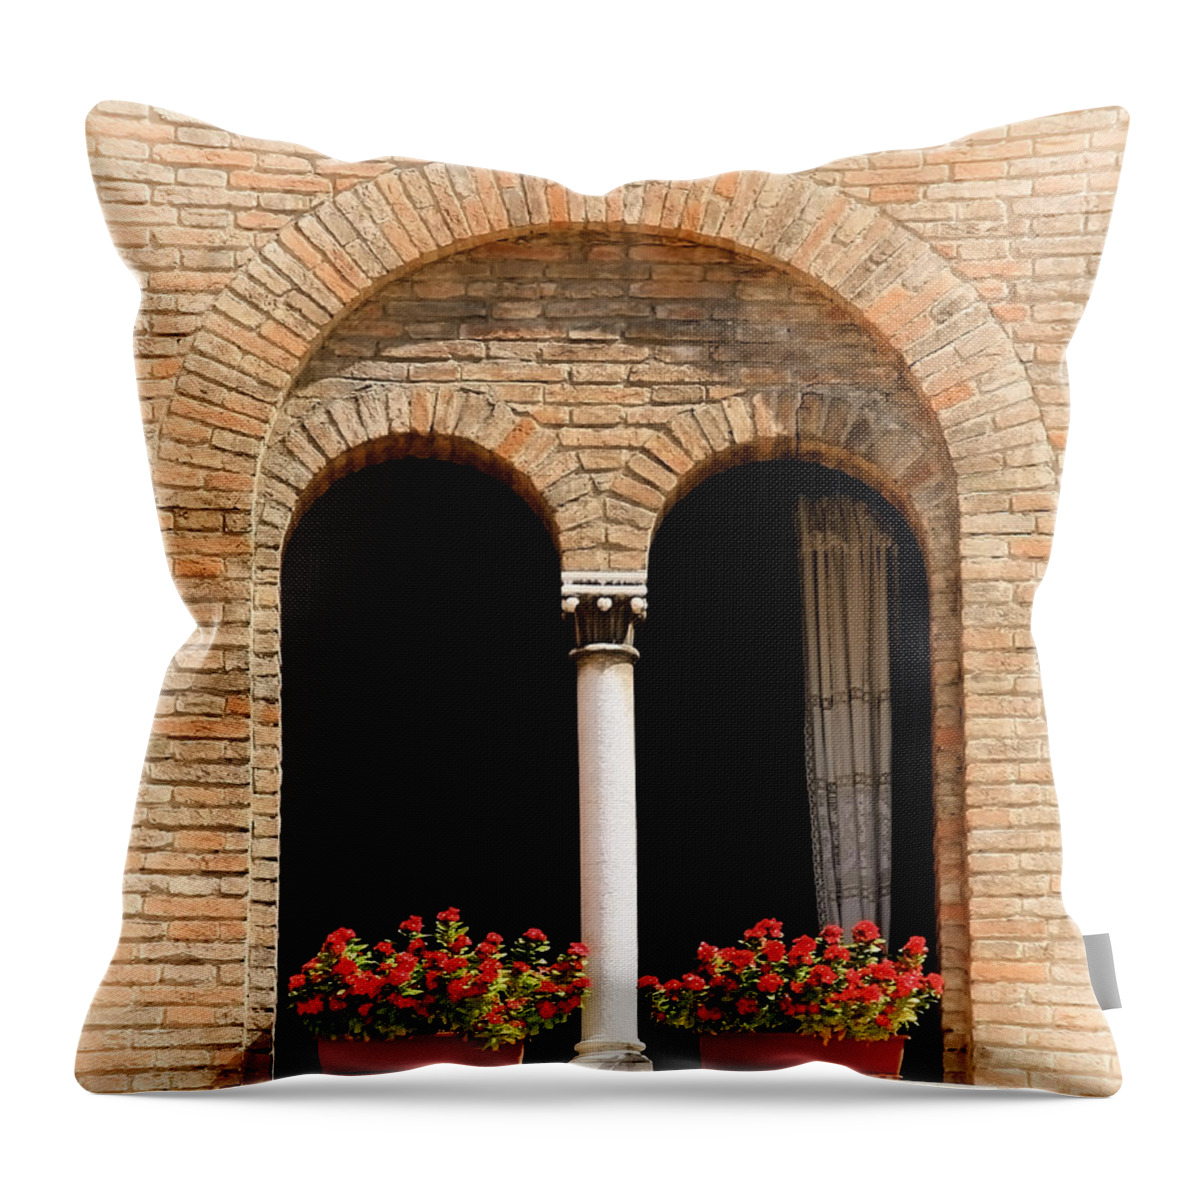 Italian Architecture Throw Pillow featuring the photograph Ravenna Window by Kate McKenna